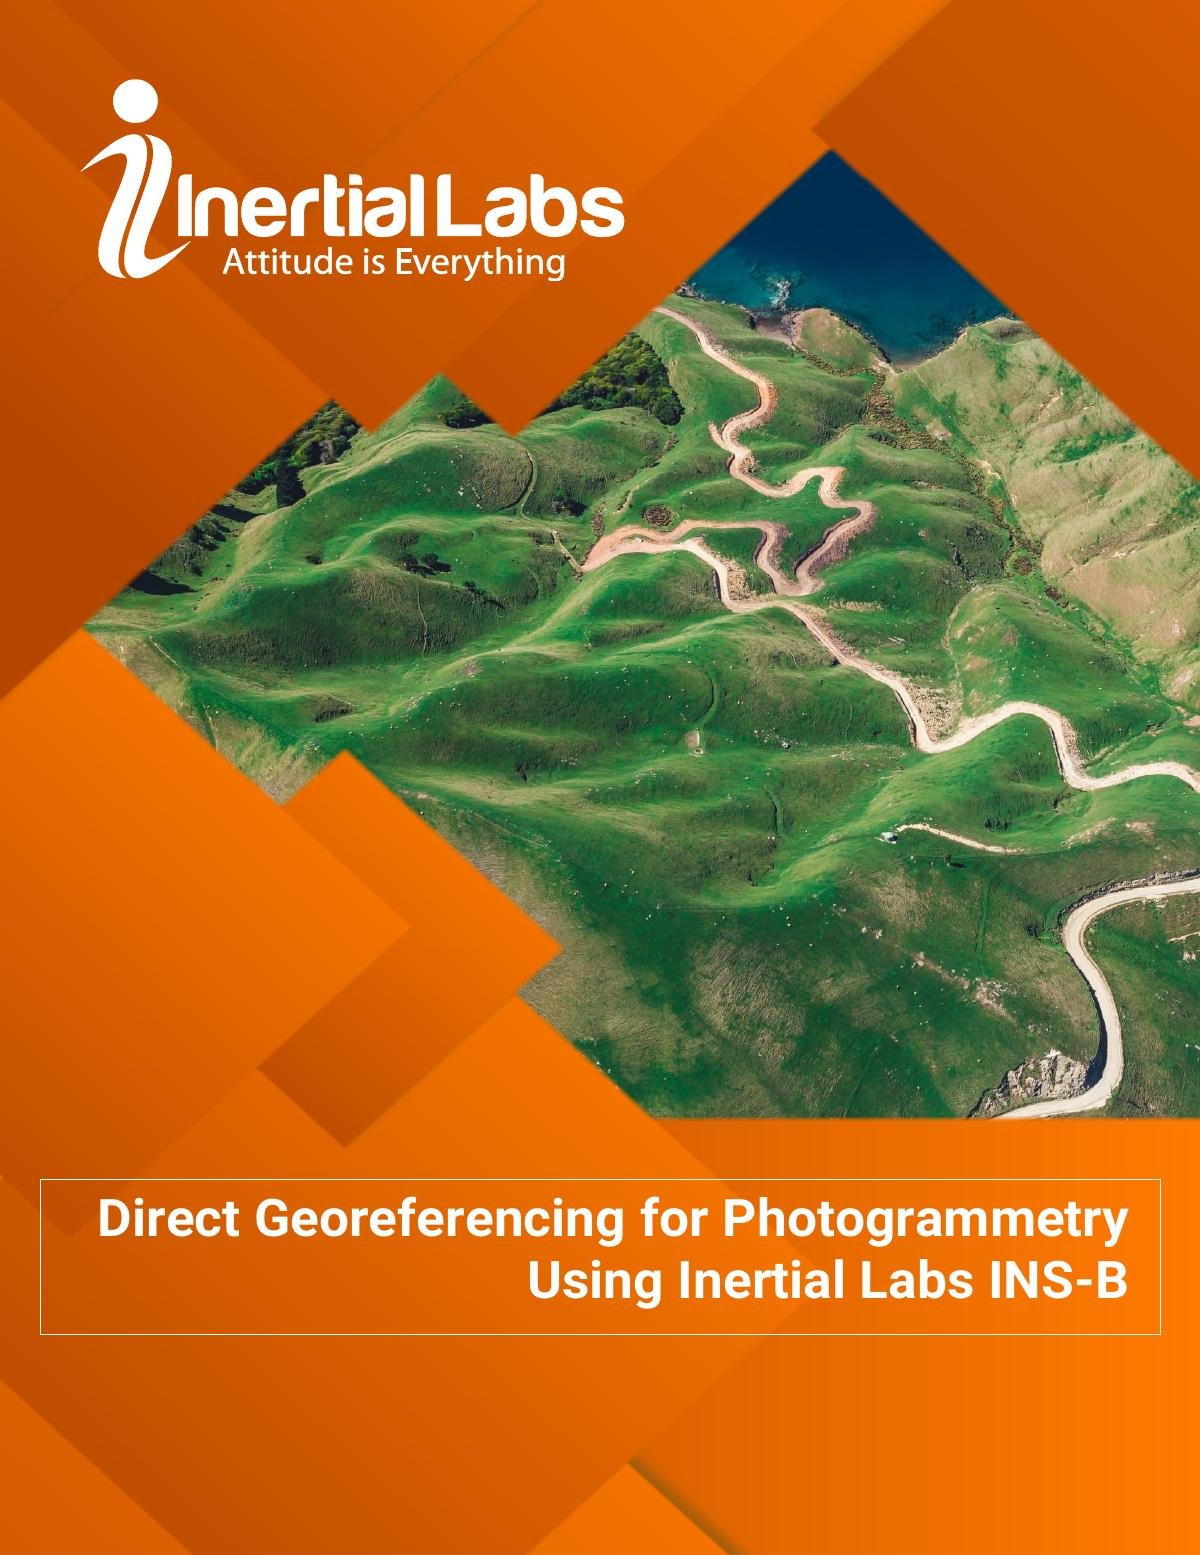 Inertial Labs Direct Georeferencing for Phootogrammetry